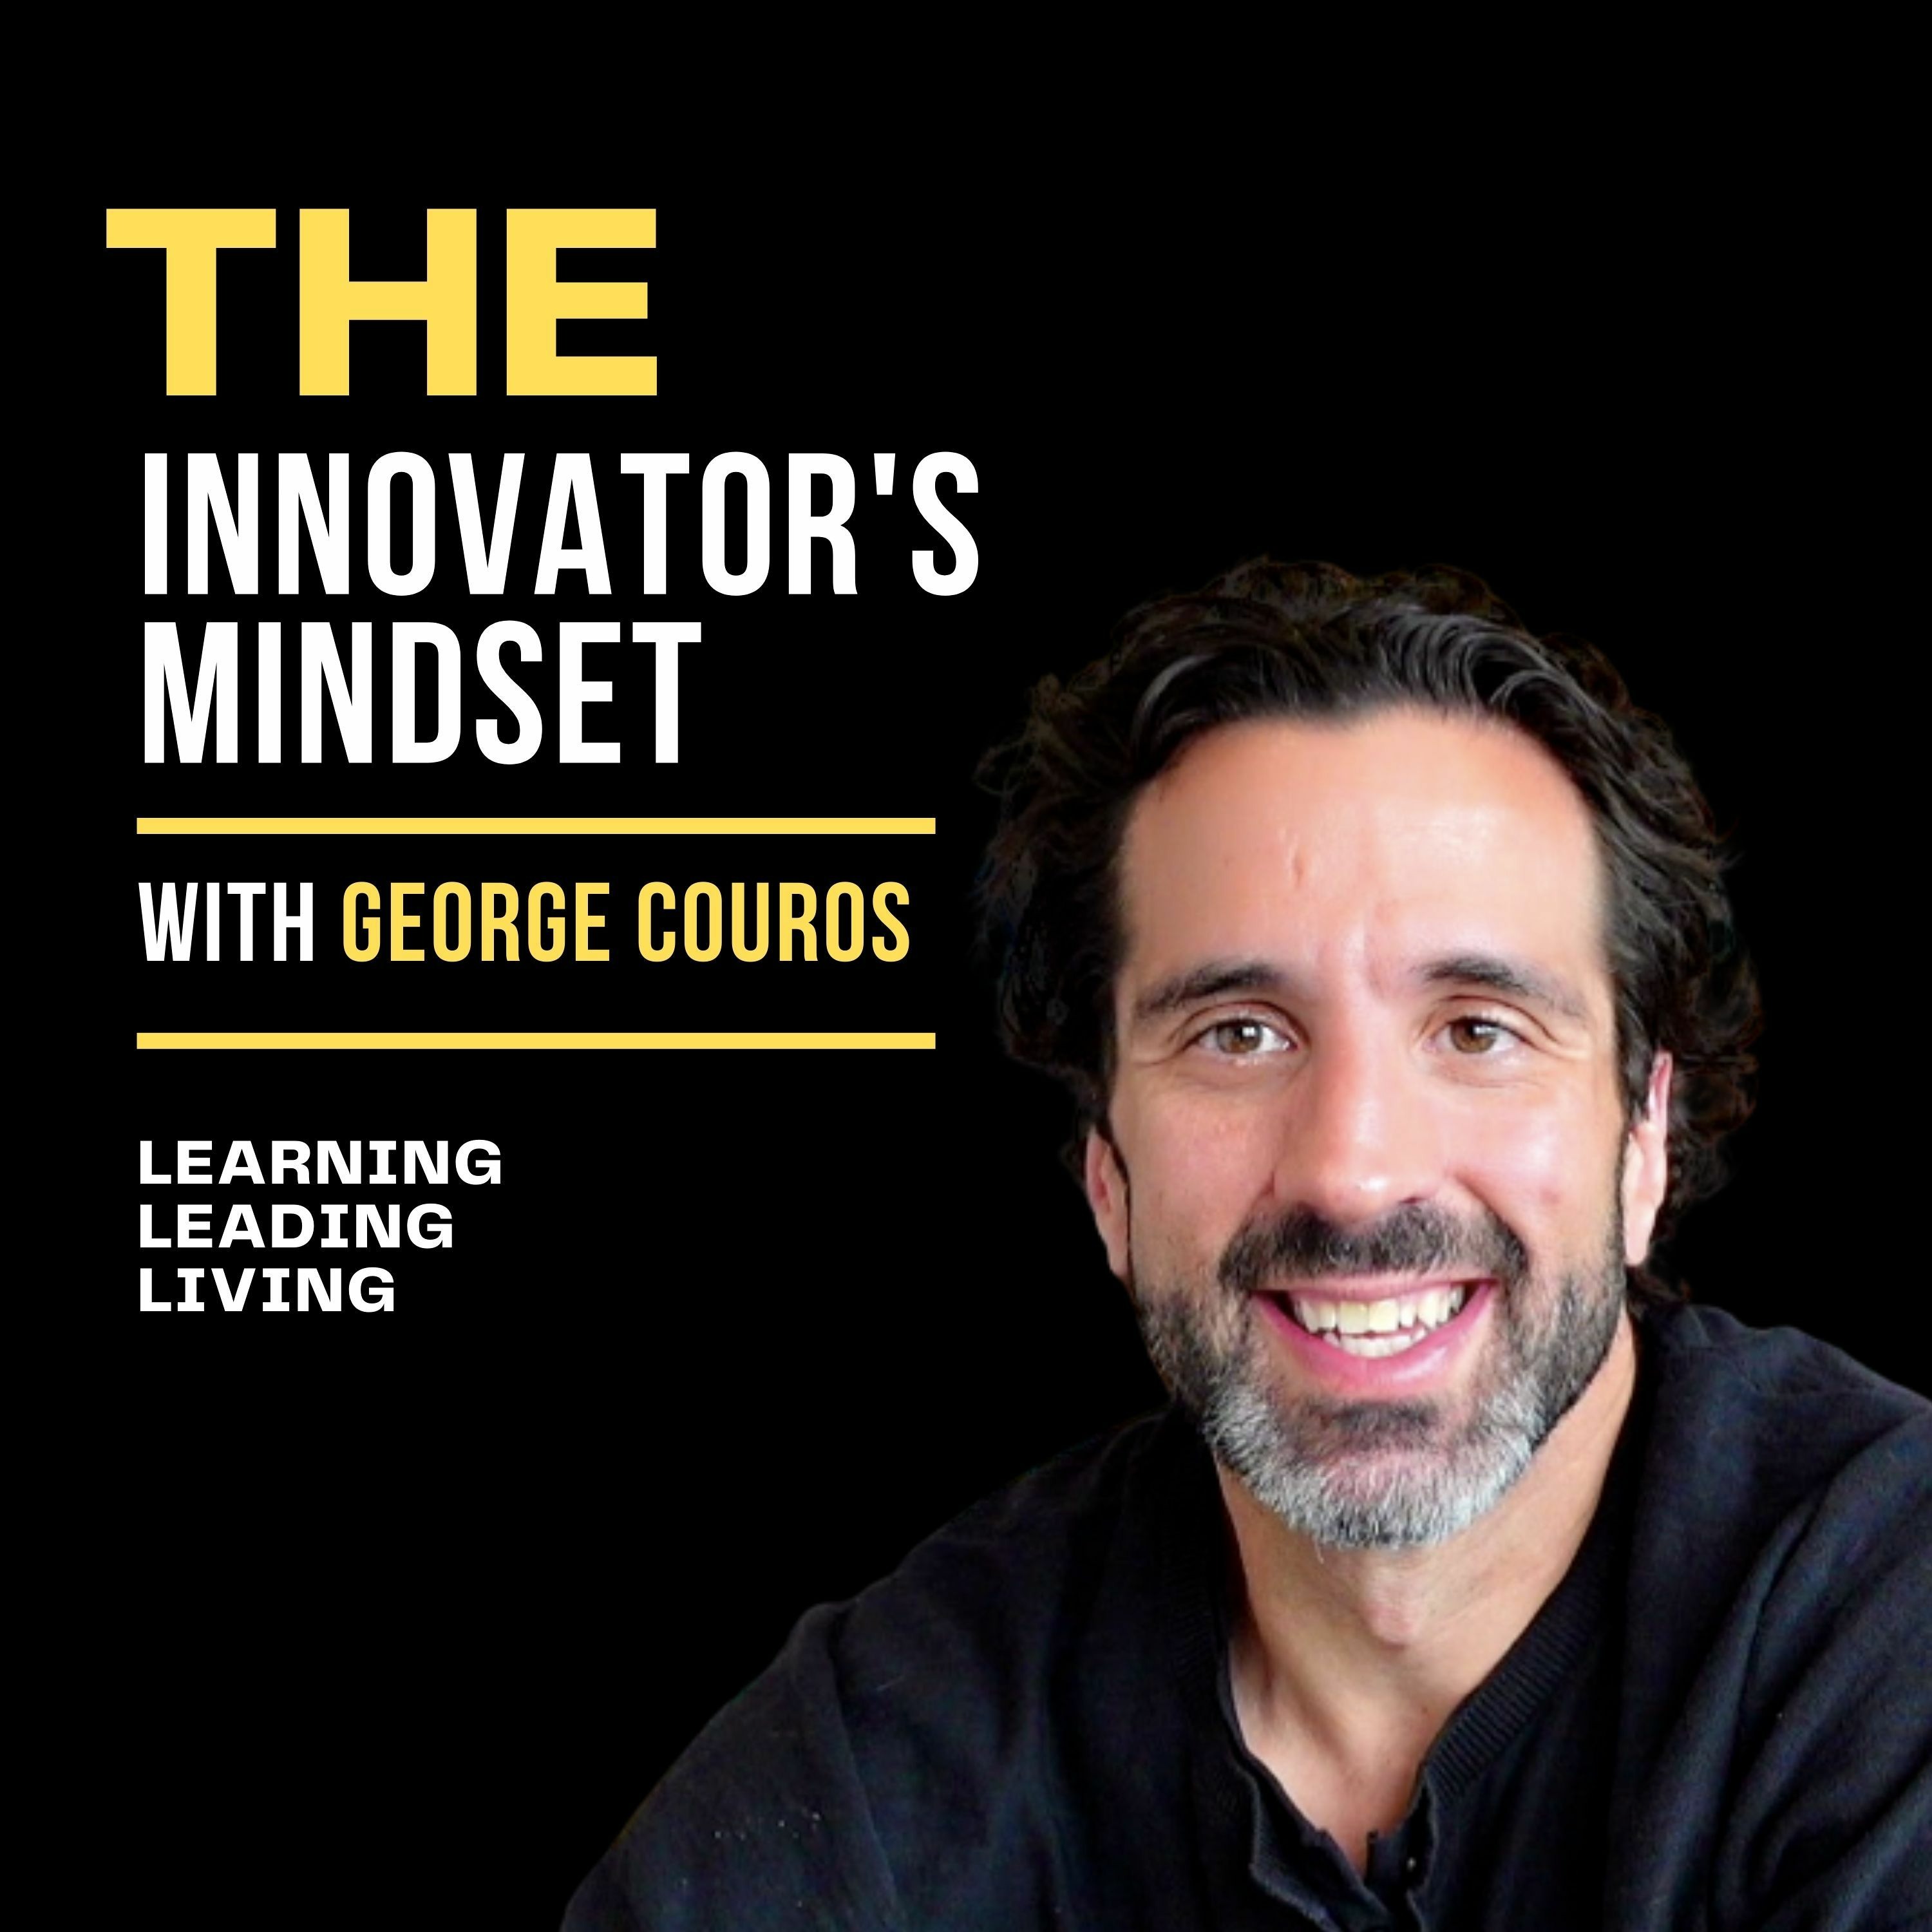 3 Questions on Educators that Inspire with Keith Fickel - The #InnovatorsMindset #Podcast